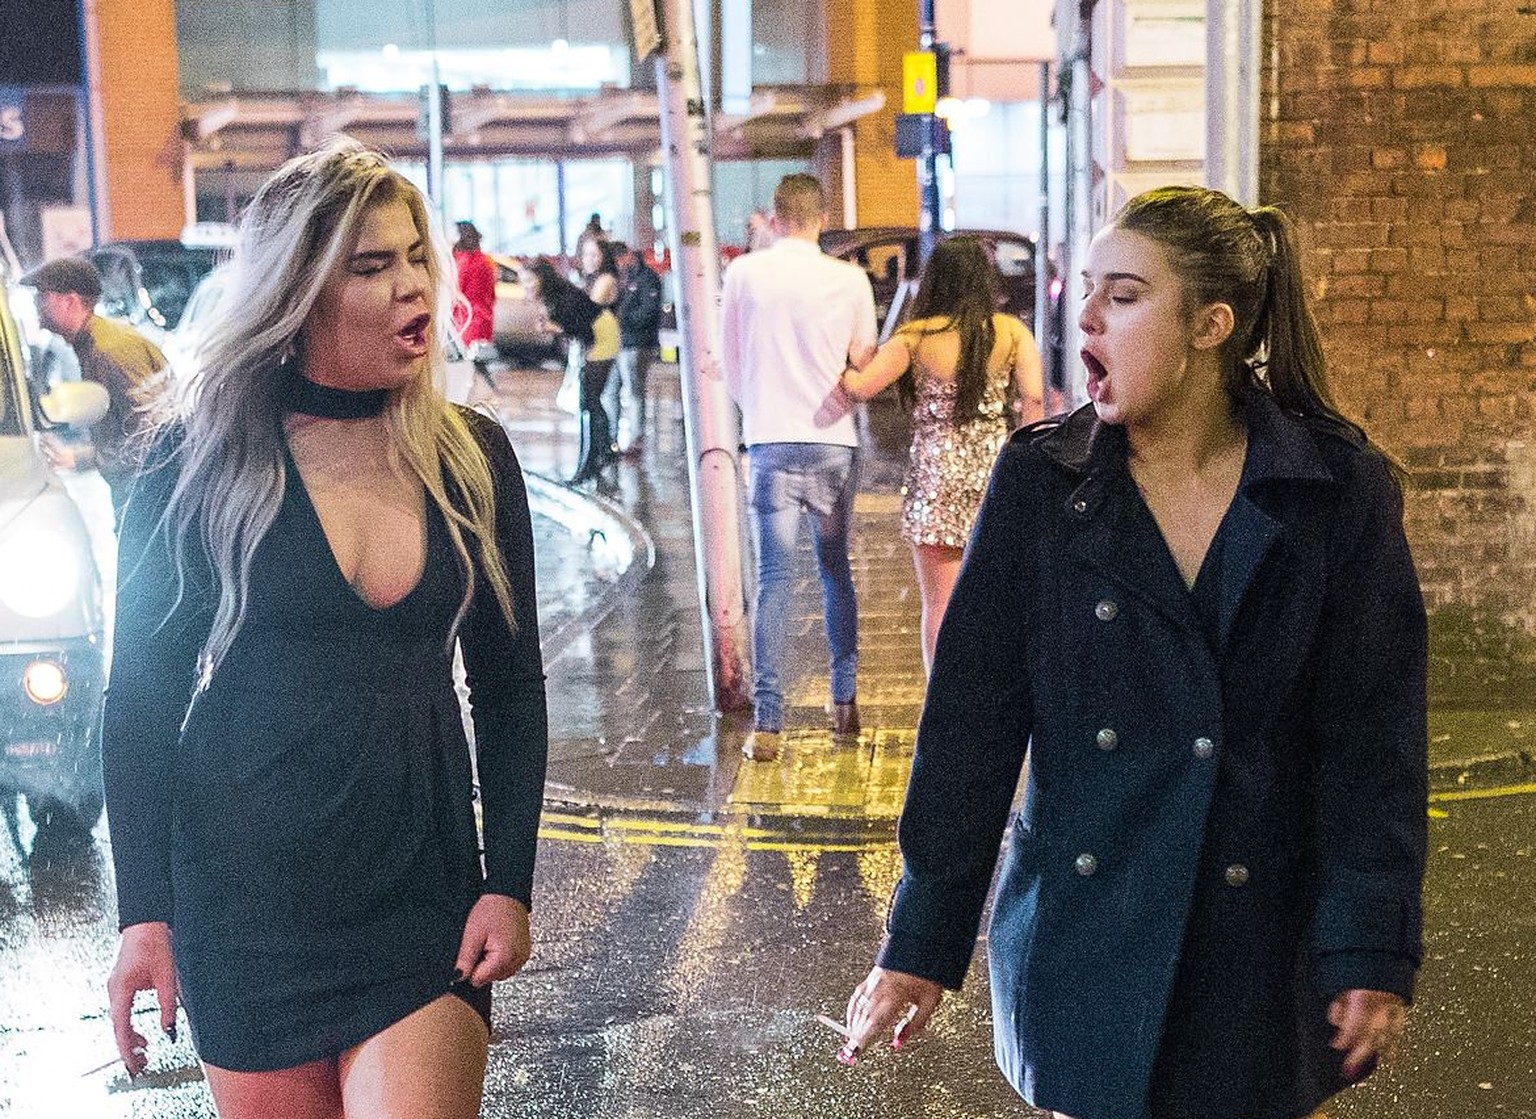 Mandatory Credit: Photo by Joel Goodman/LNP/REX/Shutterstock (7688628v)
Two women cross Well Street, a year to the minute after another photograph that went viral, taken from the same position, was ta ...